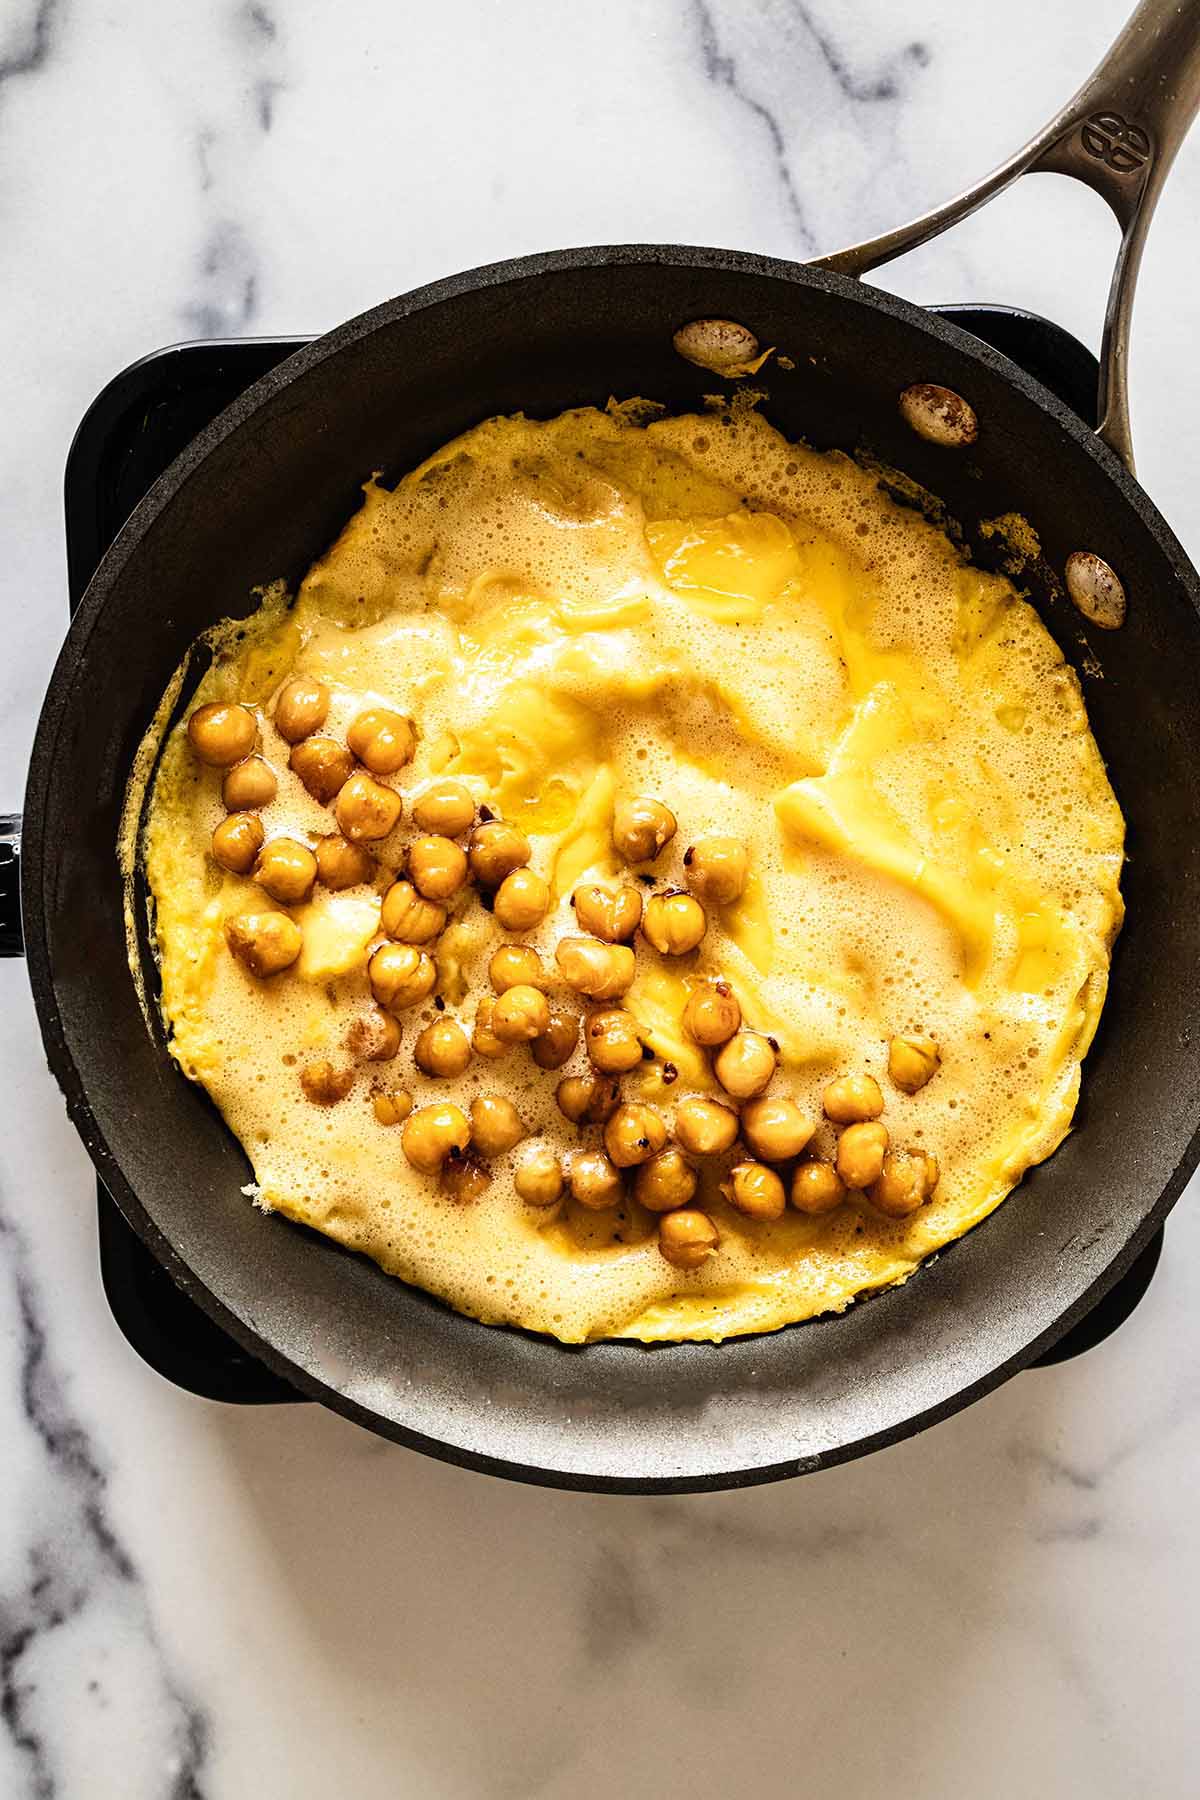 Overhead view of browned chickpeas on top of half of omelette in a skillet